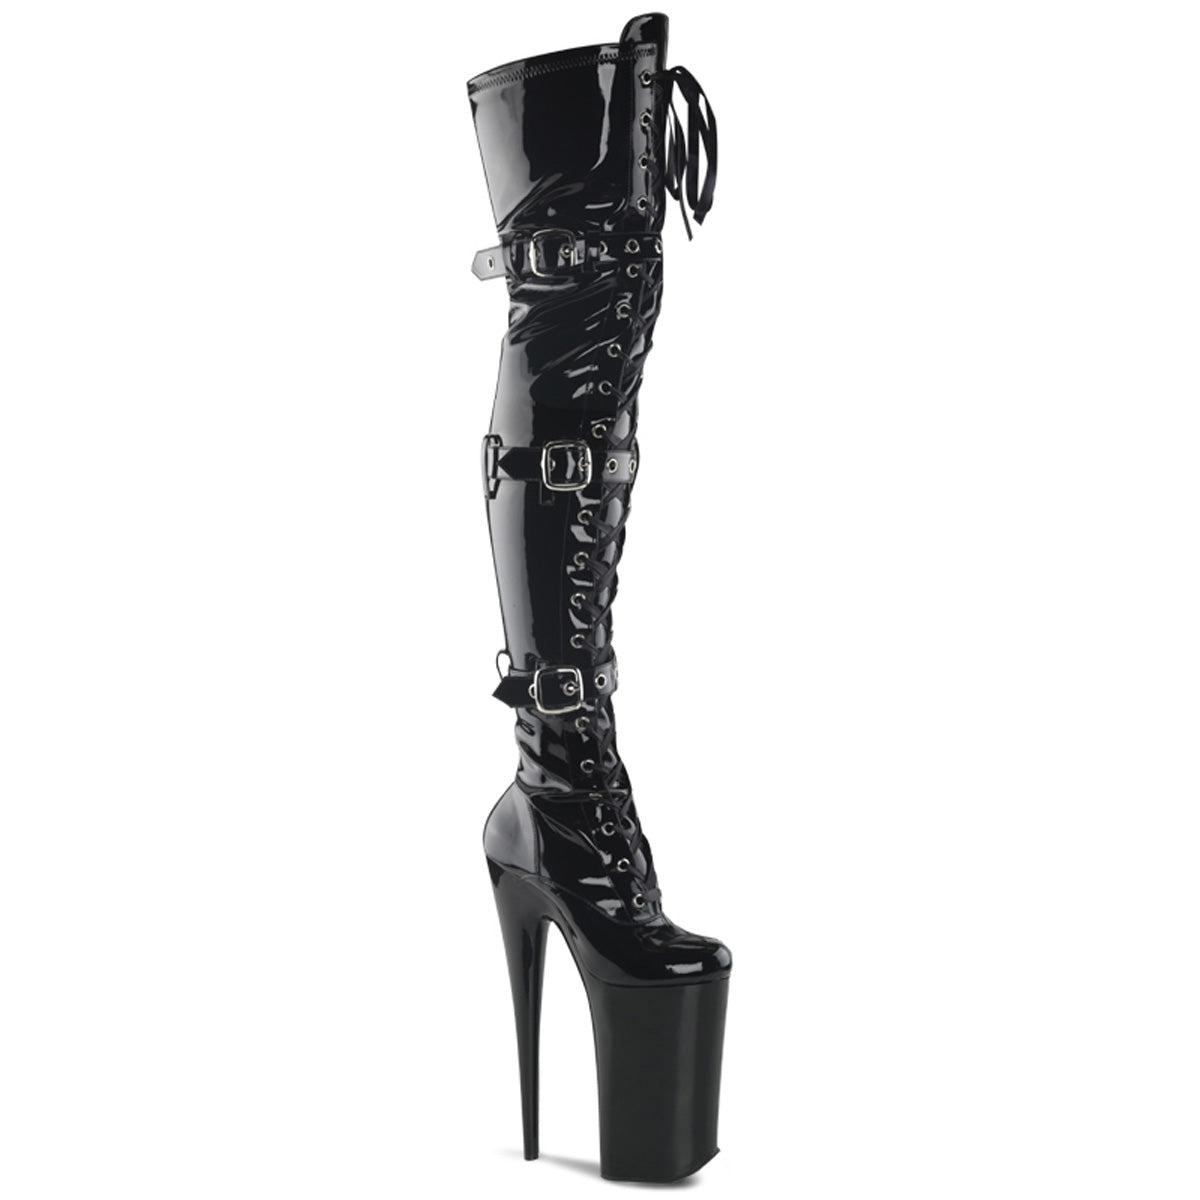 Pleaser Infinity-909 Platforms | Buy Sexy Shoes at Shoefreaks.ca